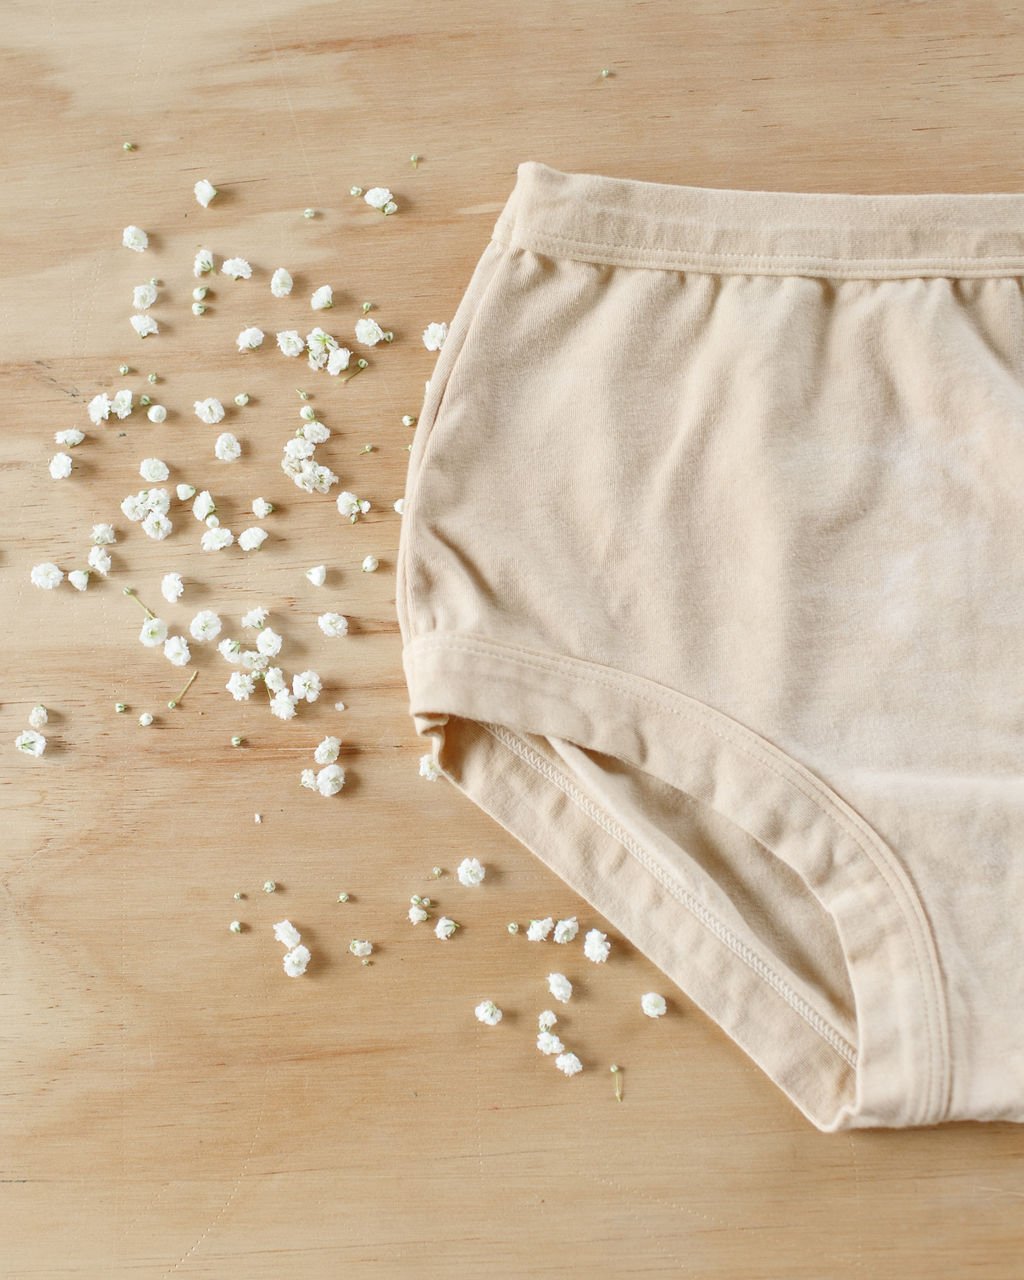 Flat lay of Thunderpants Organic Cotton Original underwear in hand dyed Shiitake color with Latte white flowers around.